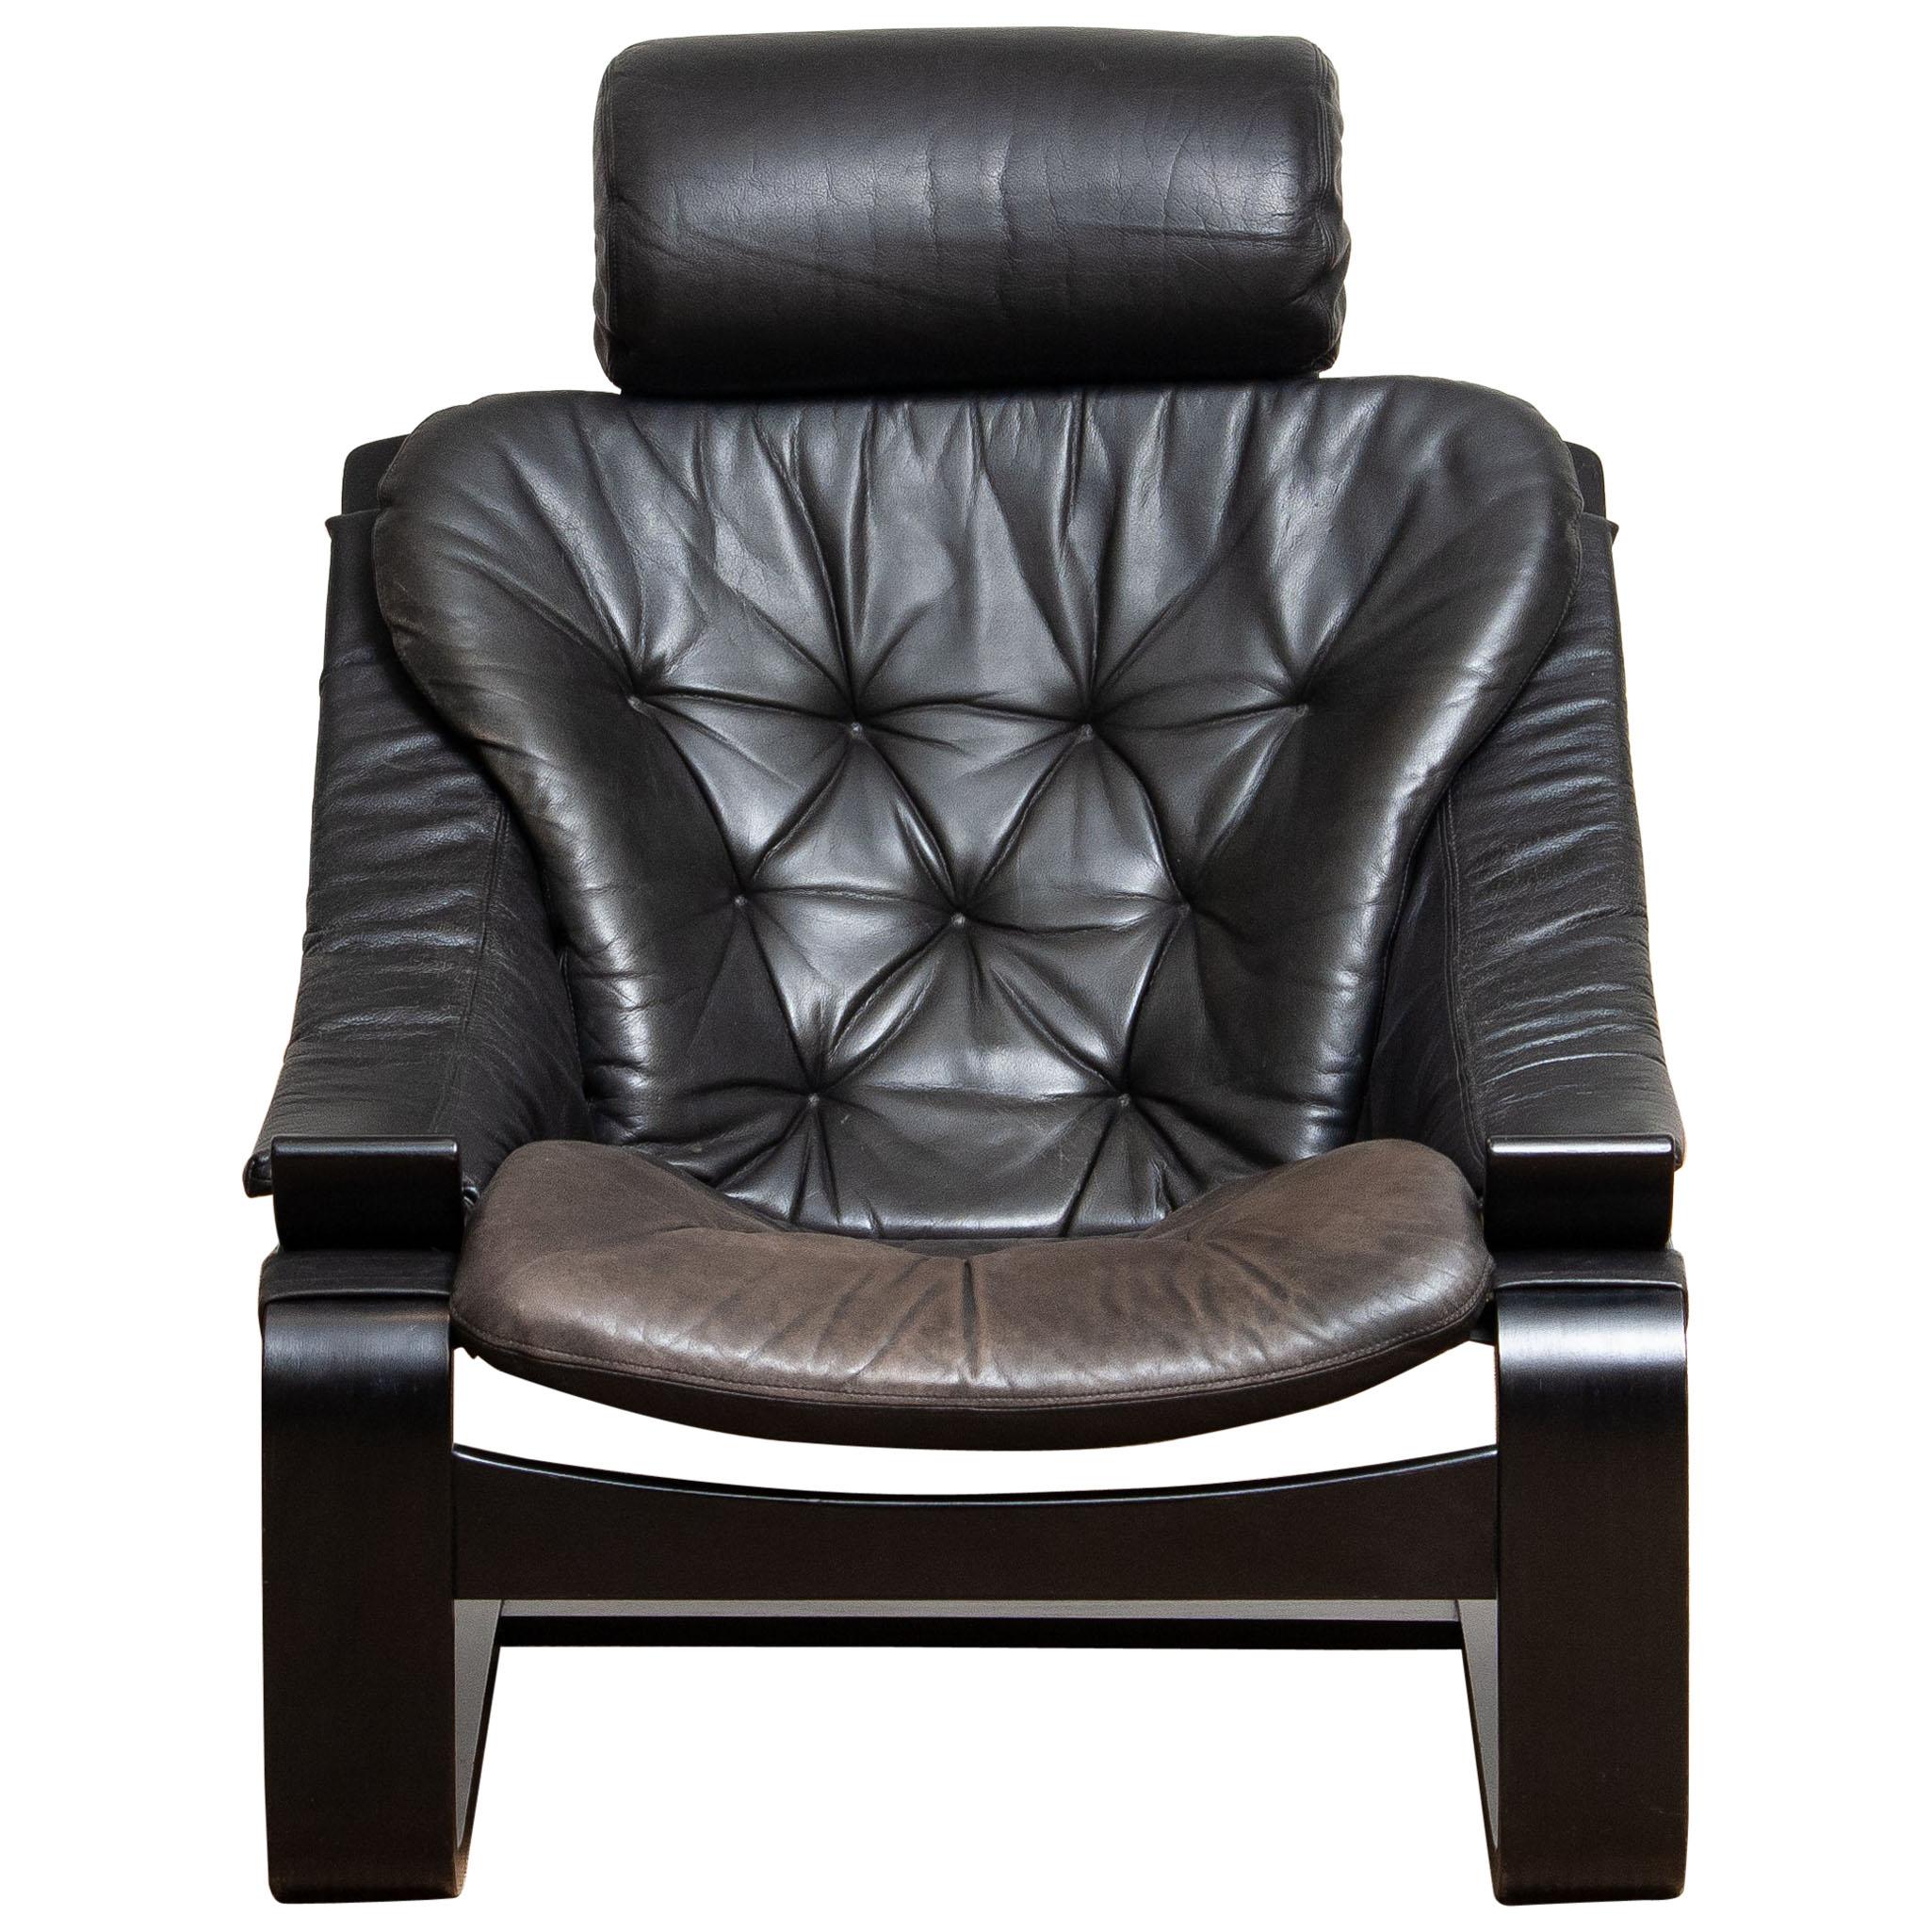 1970s, Black Kroken Lounge Chair by Ake Fribytter for Nelo Sweden in Leather